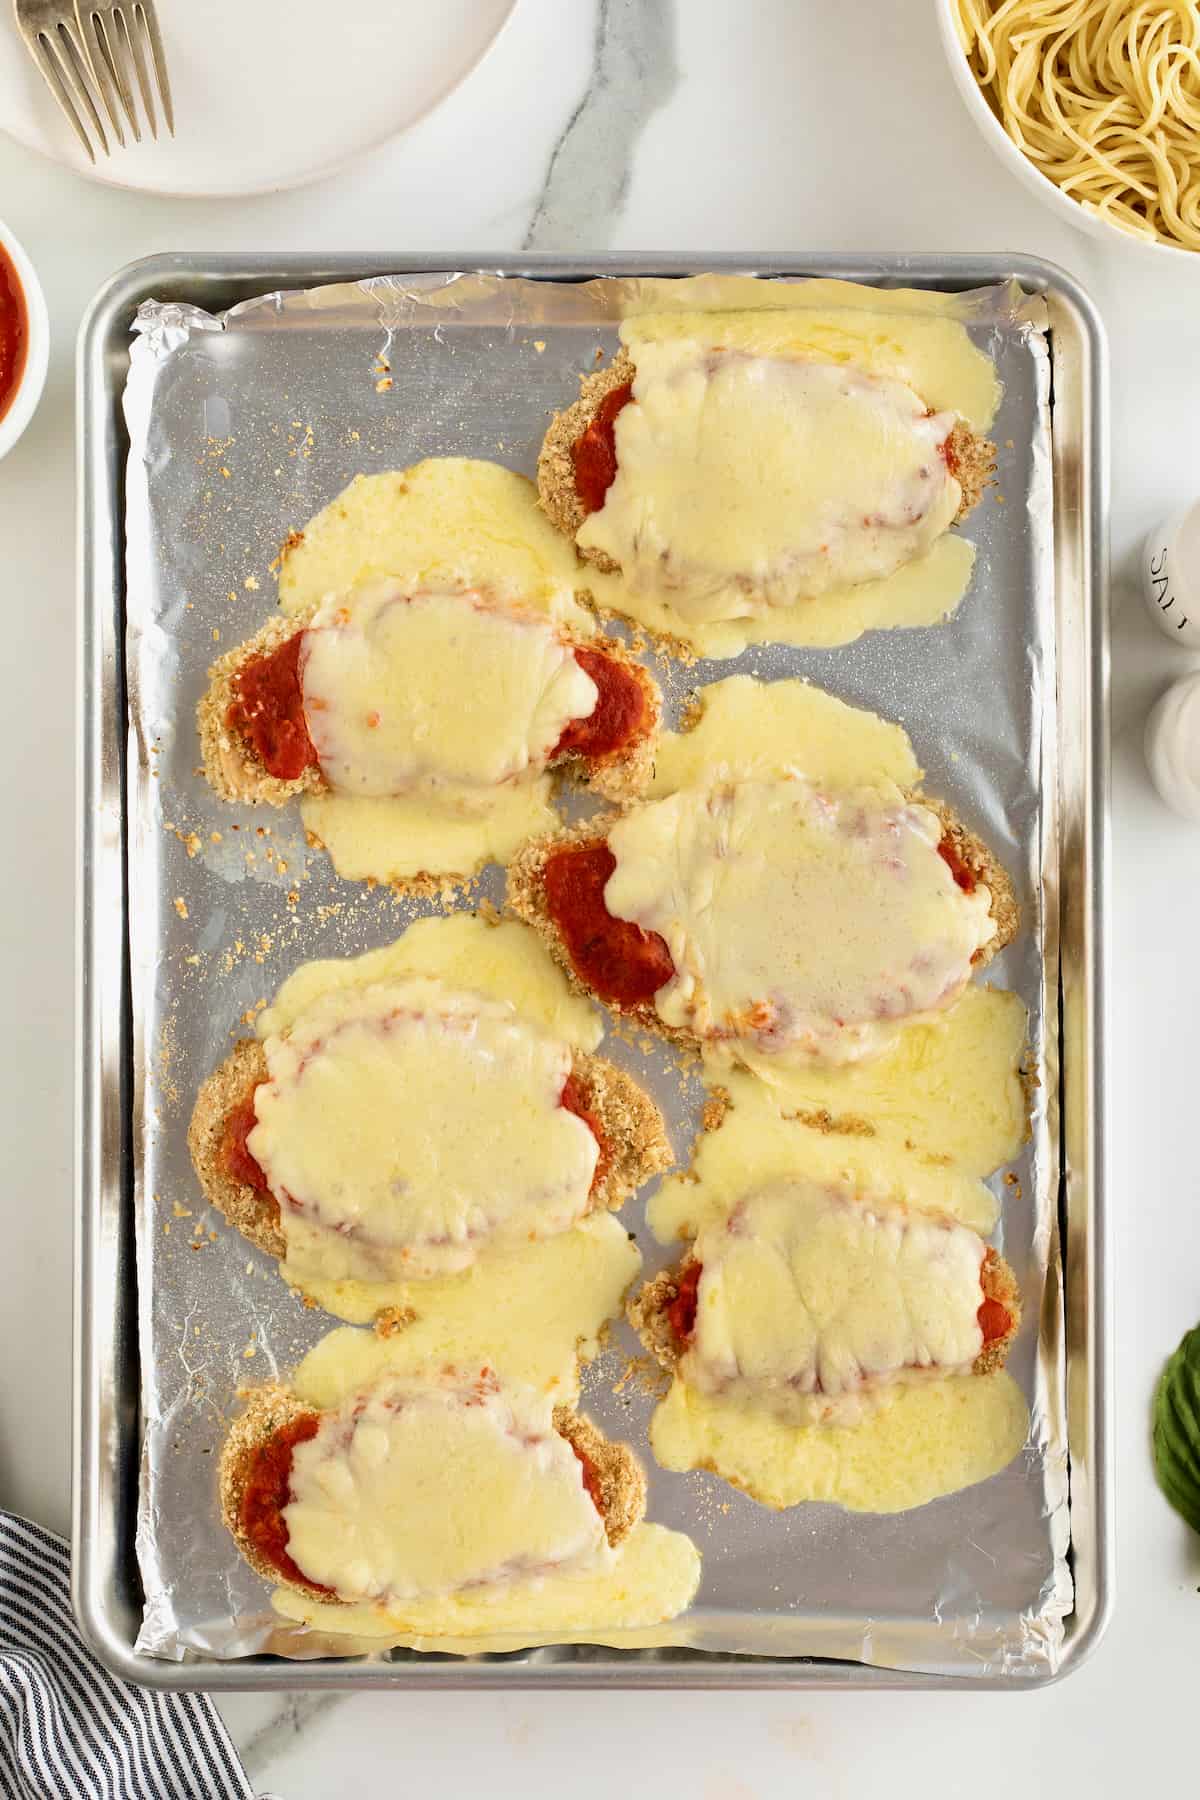 Six chicken cutlets topped with marinara sauce and melted fresh mozzarella on an aluminum baking sheet.